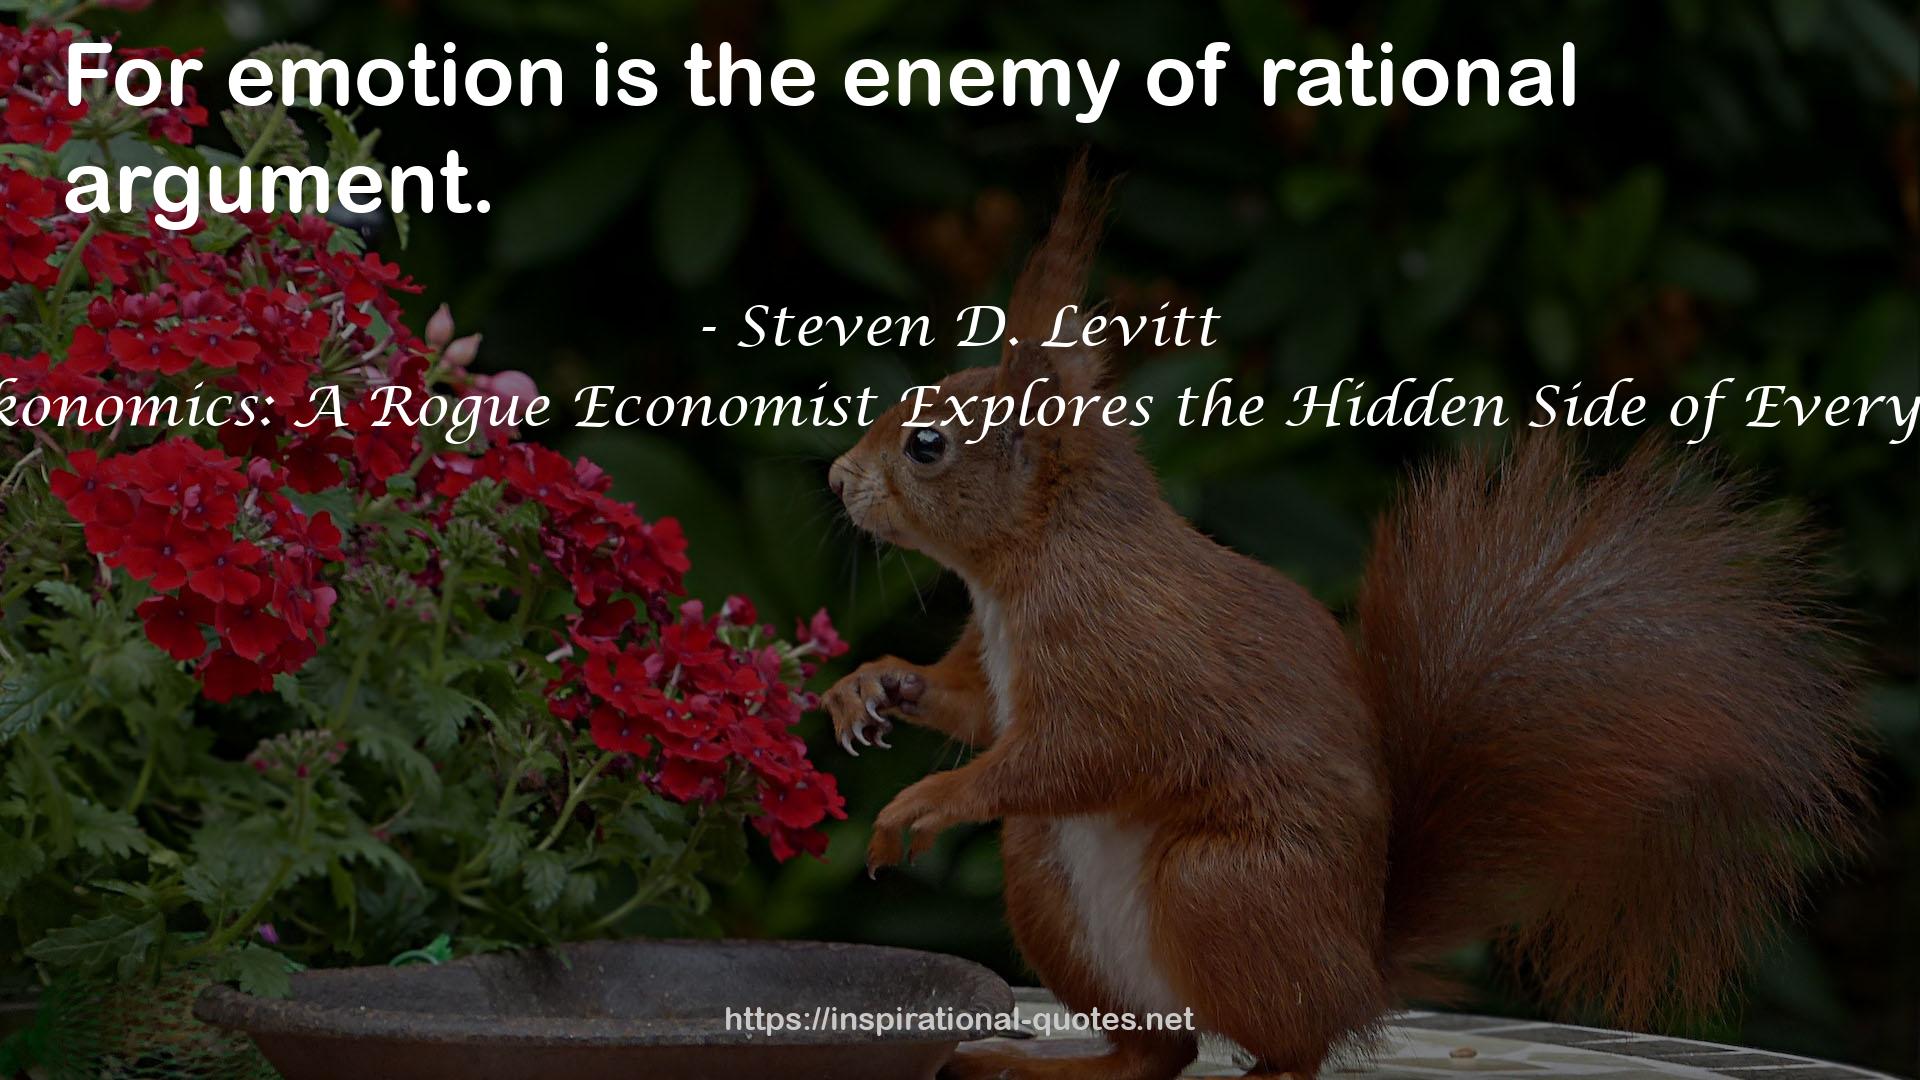 Freakonomics: A Rogue Economist Explores the Hidden Side of Everything QUOTES